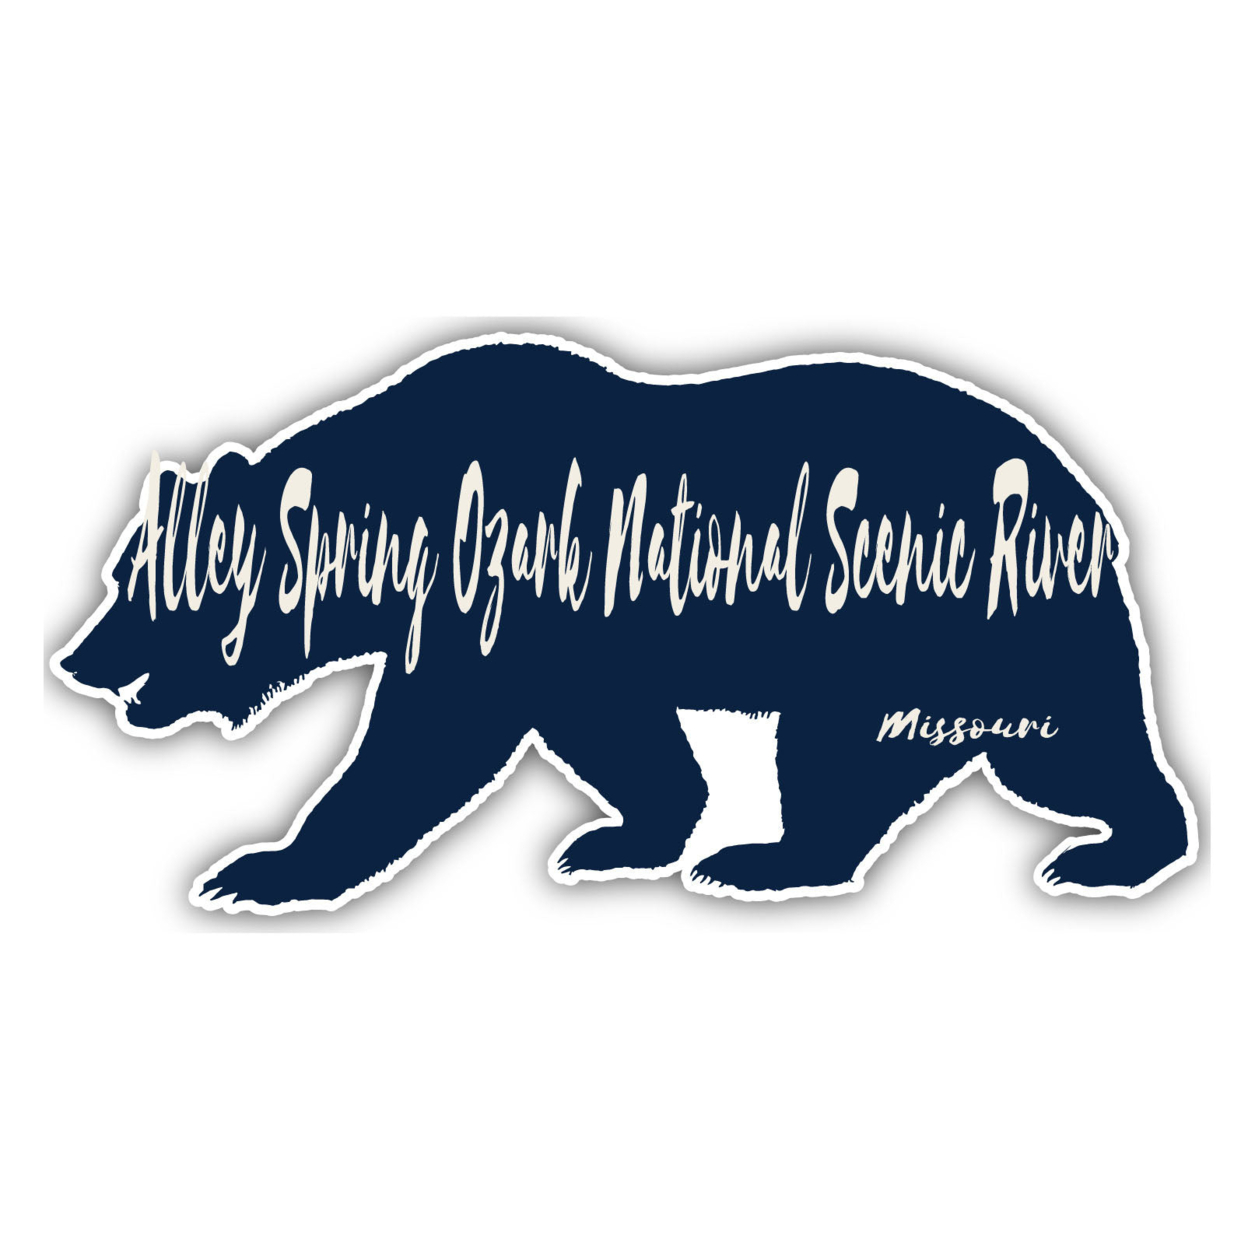 Alley Spring Ozark National Scenic River Missouri Souvenir Decorative Stickers (Choose Theme And Size) - 4-Pack, 4-Inch, Bear